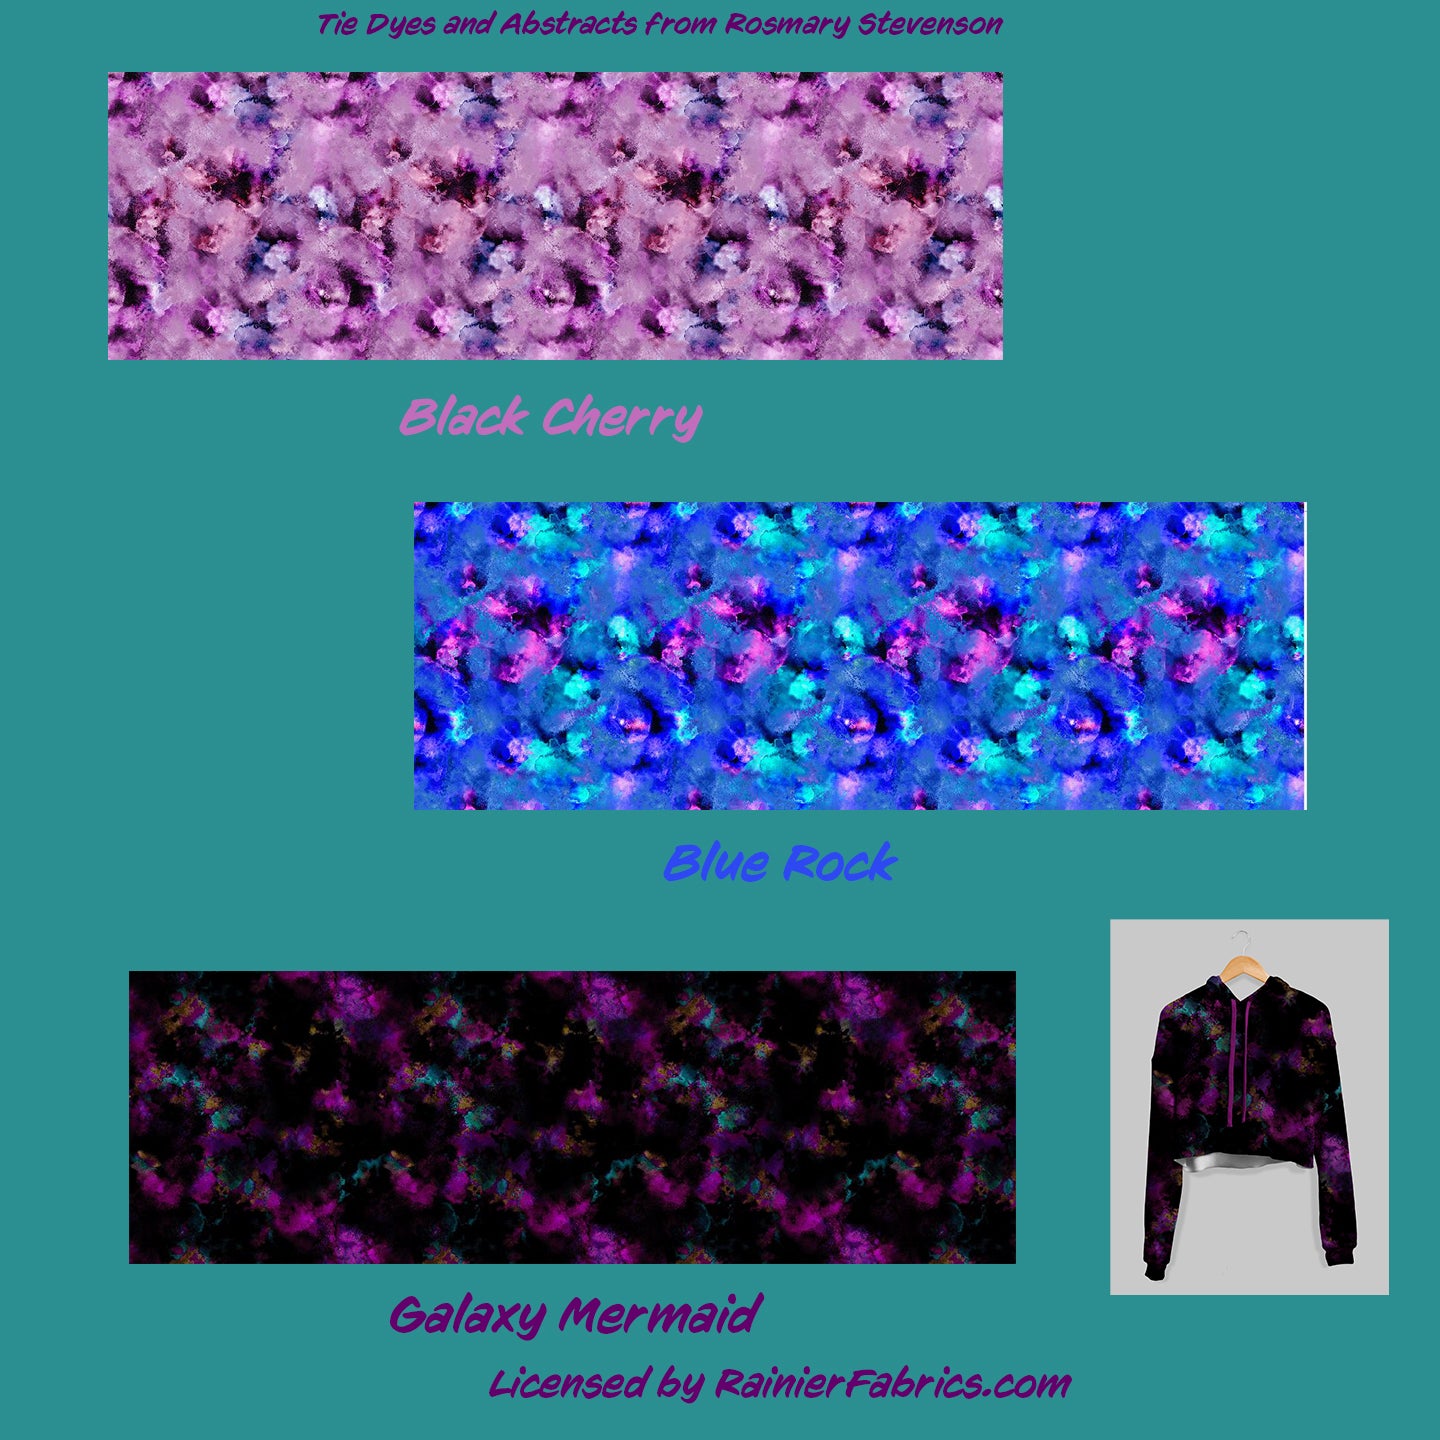 More Tie Dyes and Abstract from Rosemary Stevenson  - 2-5 day turnaround - Order by 1/2 yard; Description of bases below